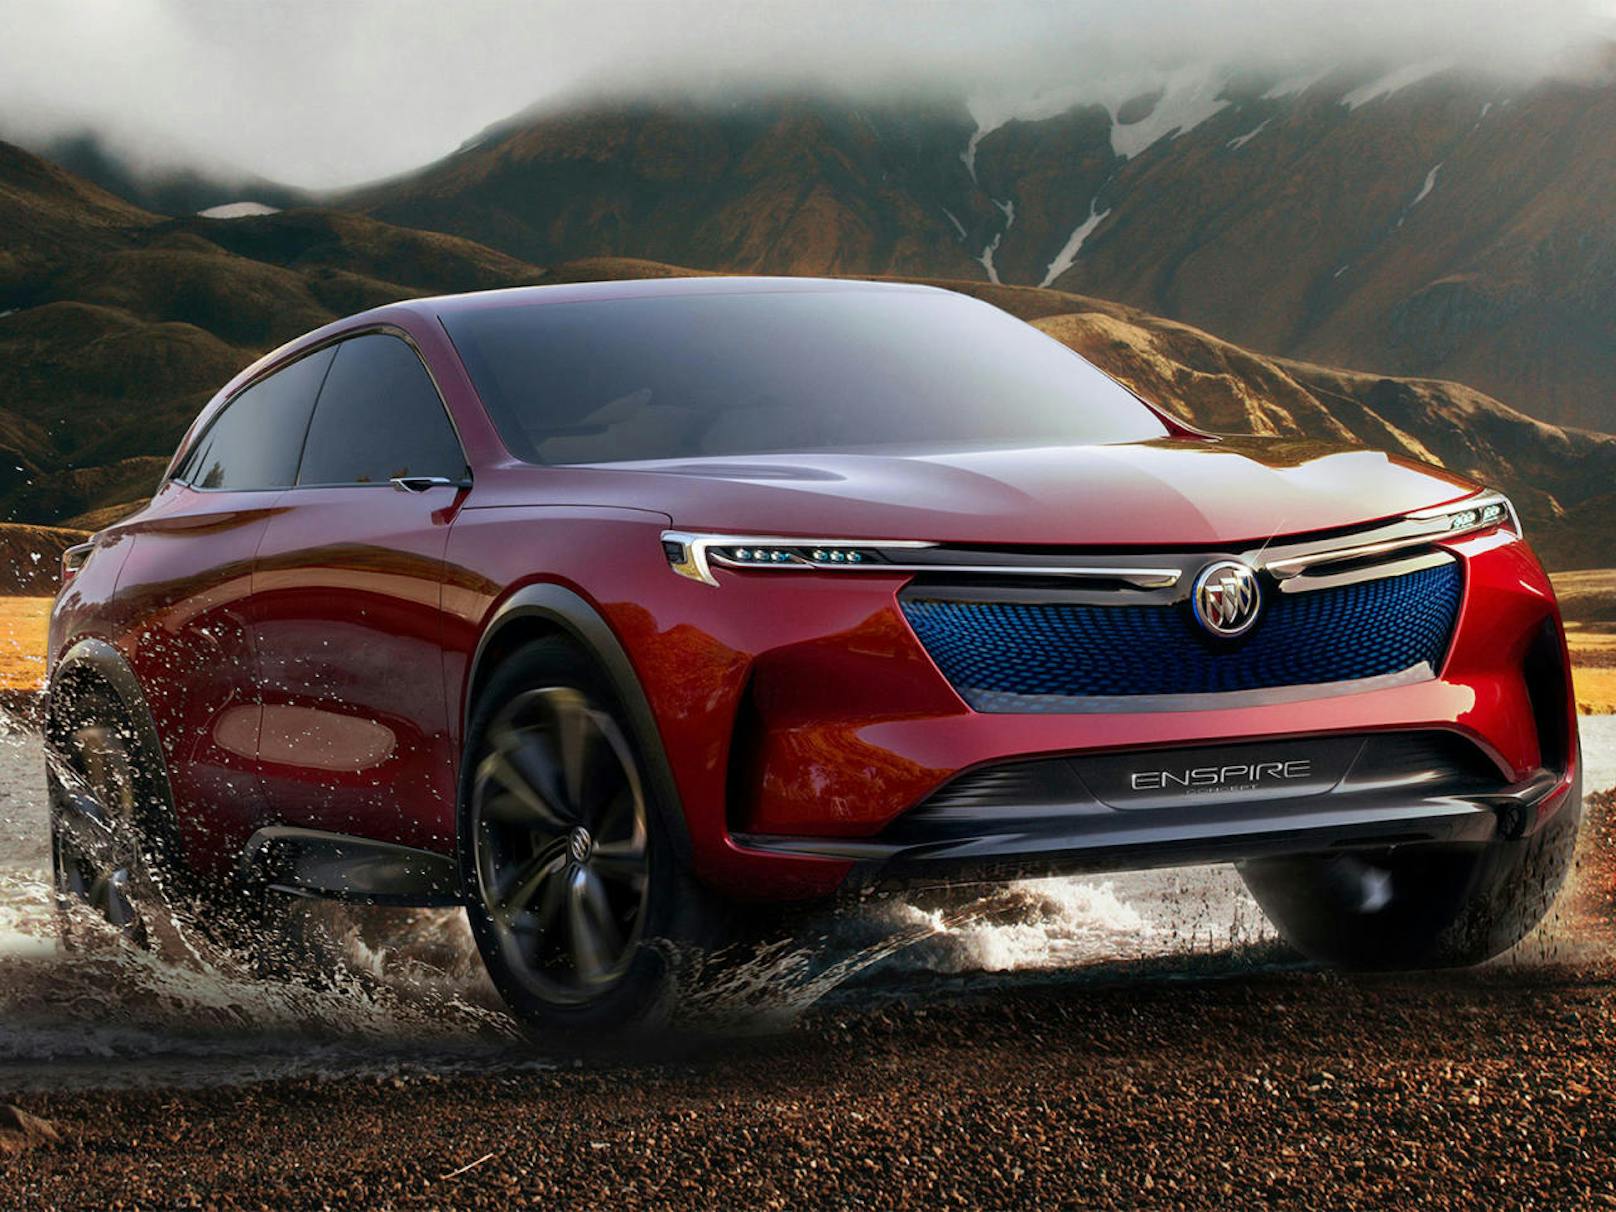 Frontansicht Buick Enspire Concept (c) Buick